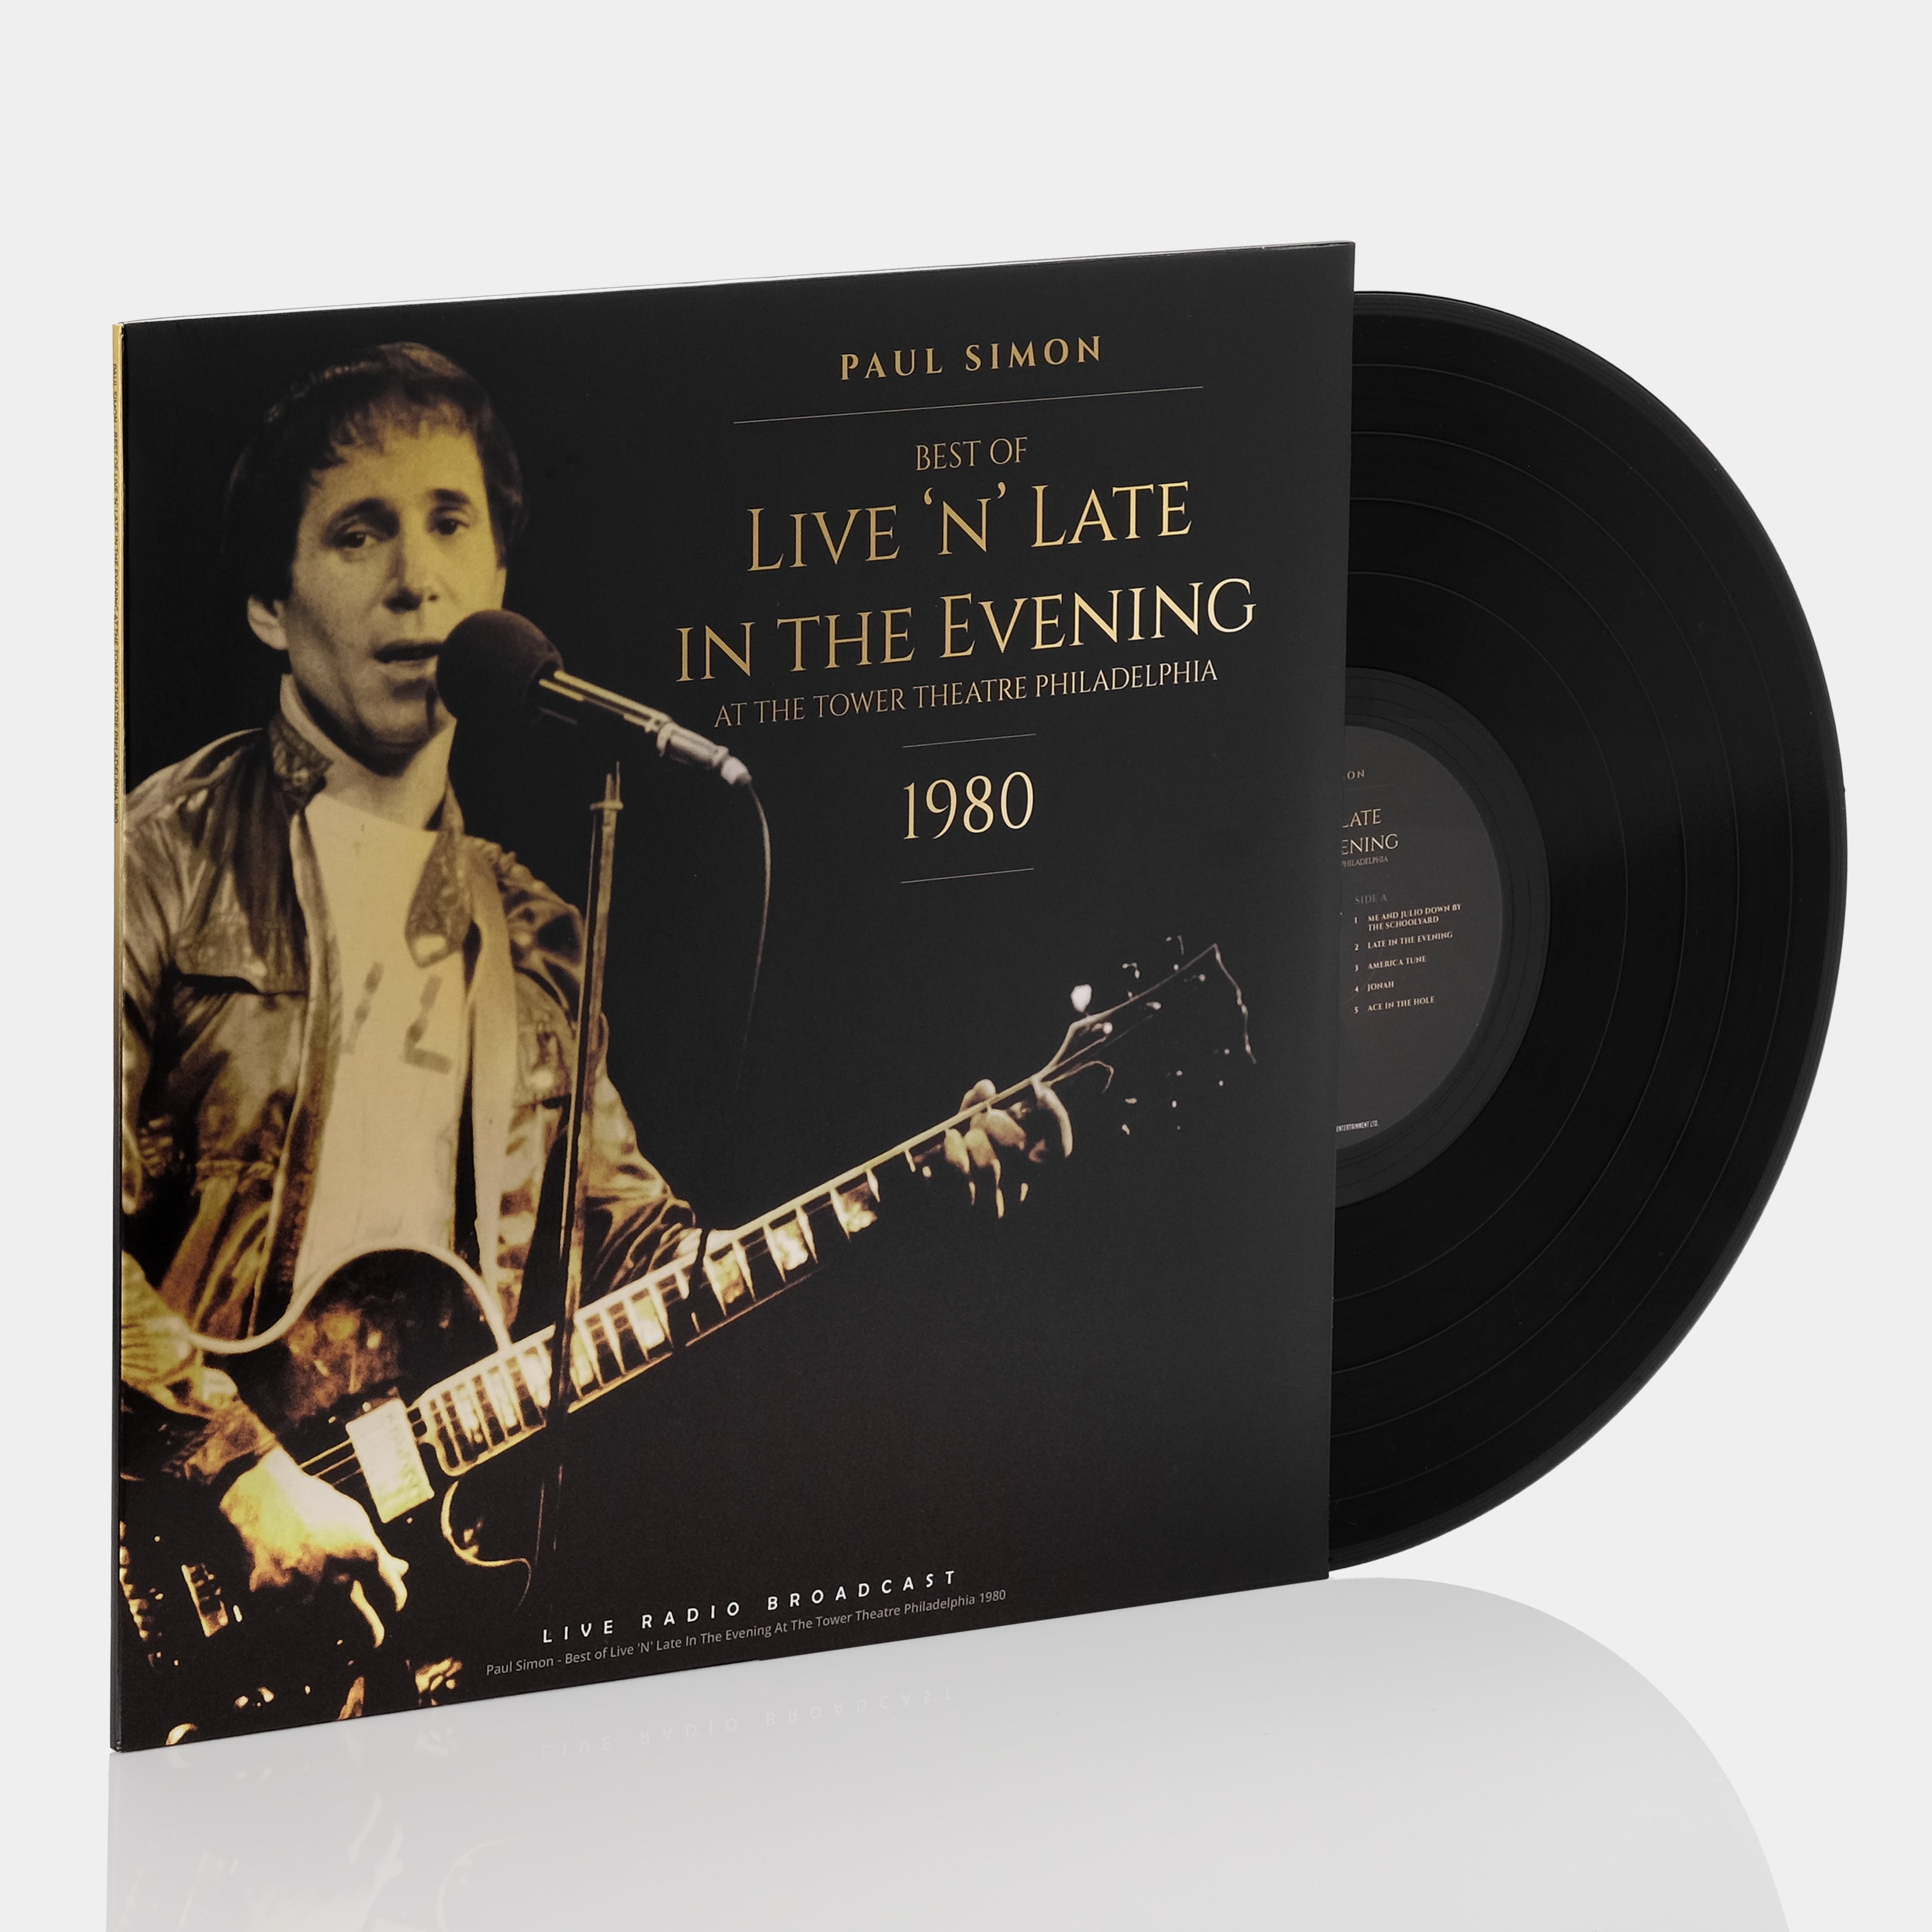 Paul Simon - Best Of Live 'N' Late In The Evening LP Vinyl Record